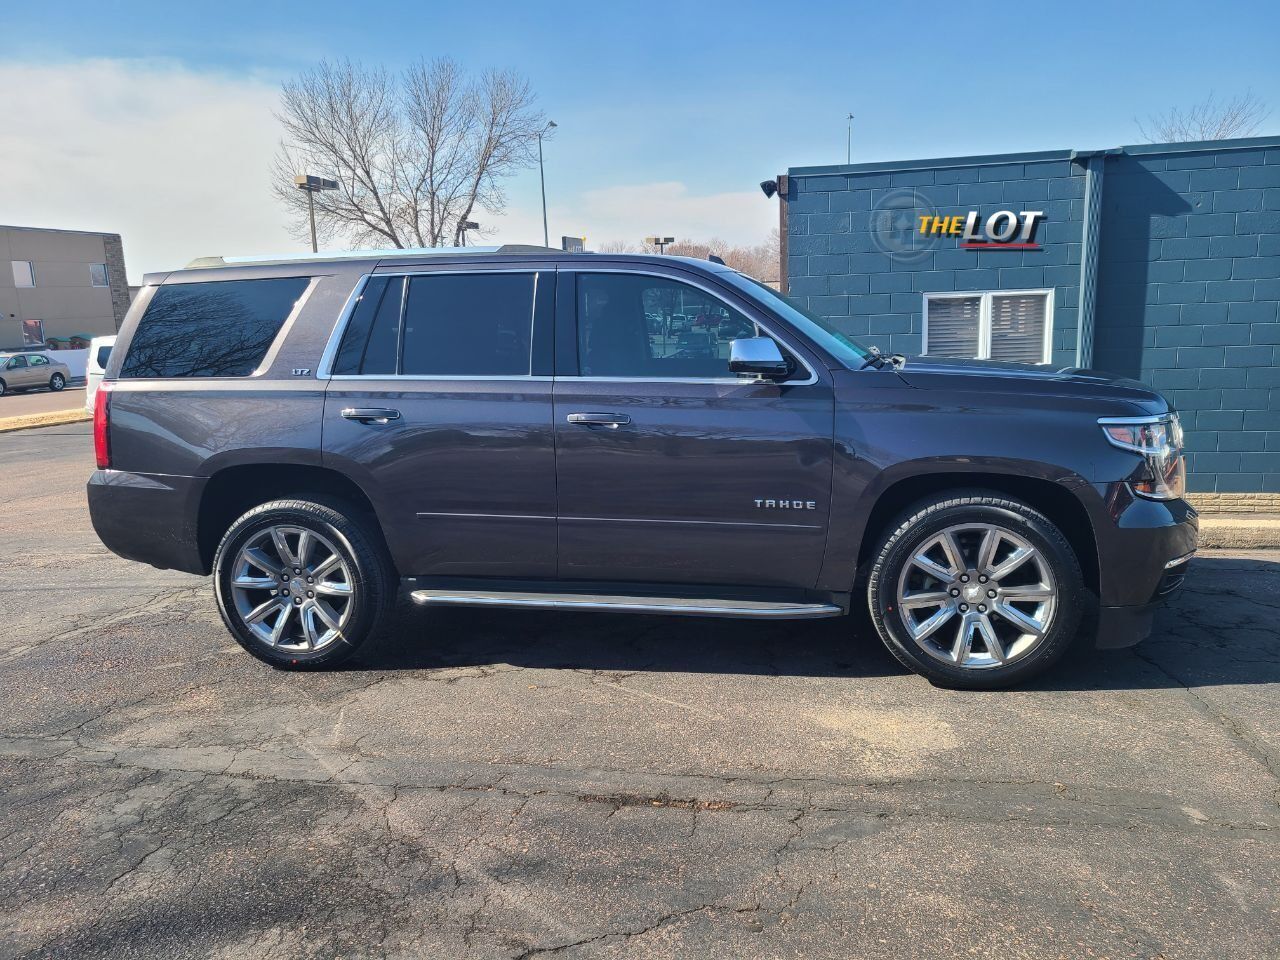 2016 Chevrolet Tahoe Sioux Falls SD